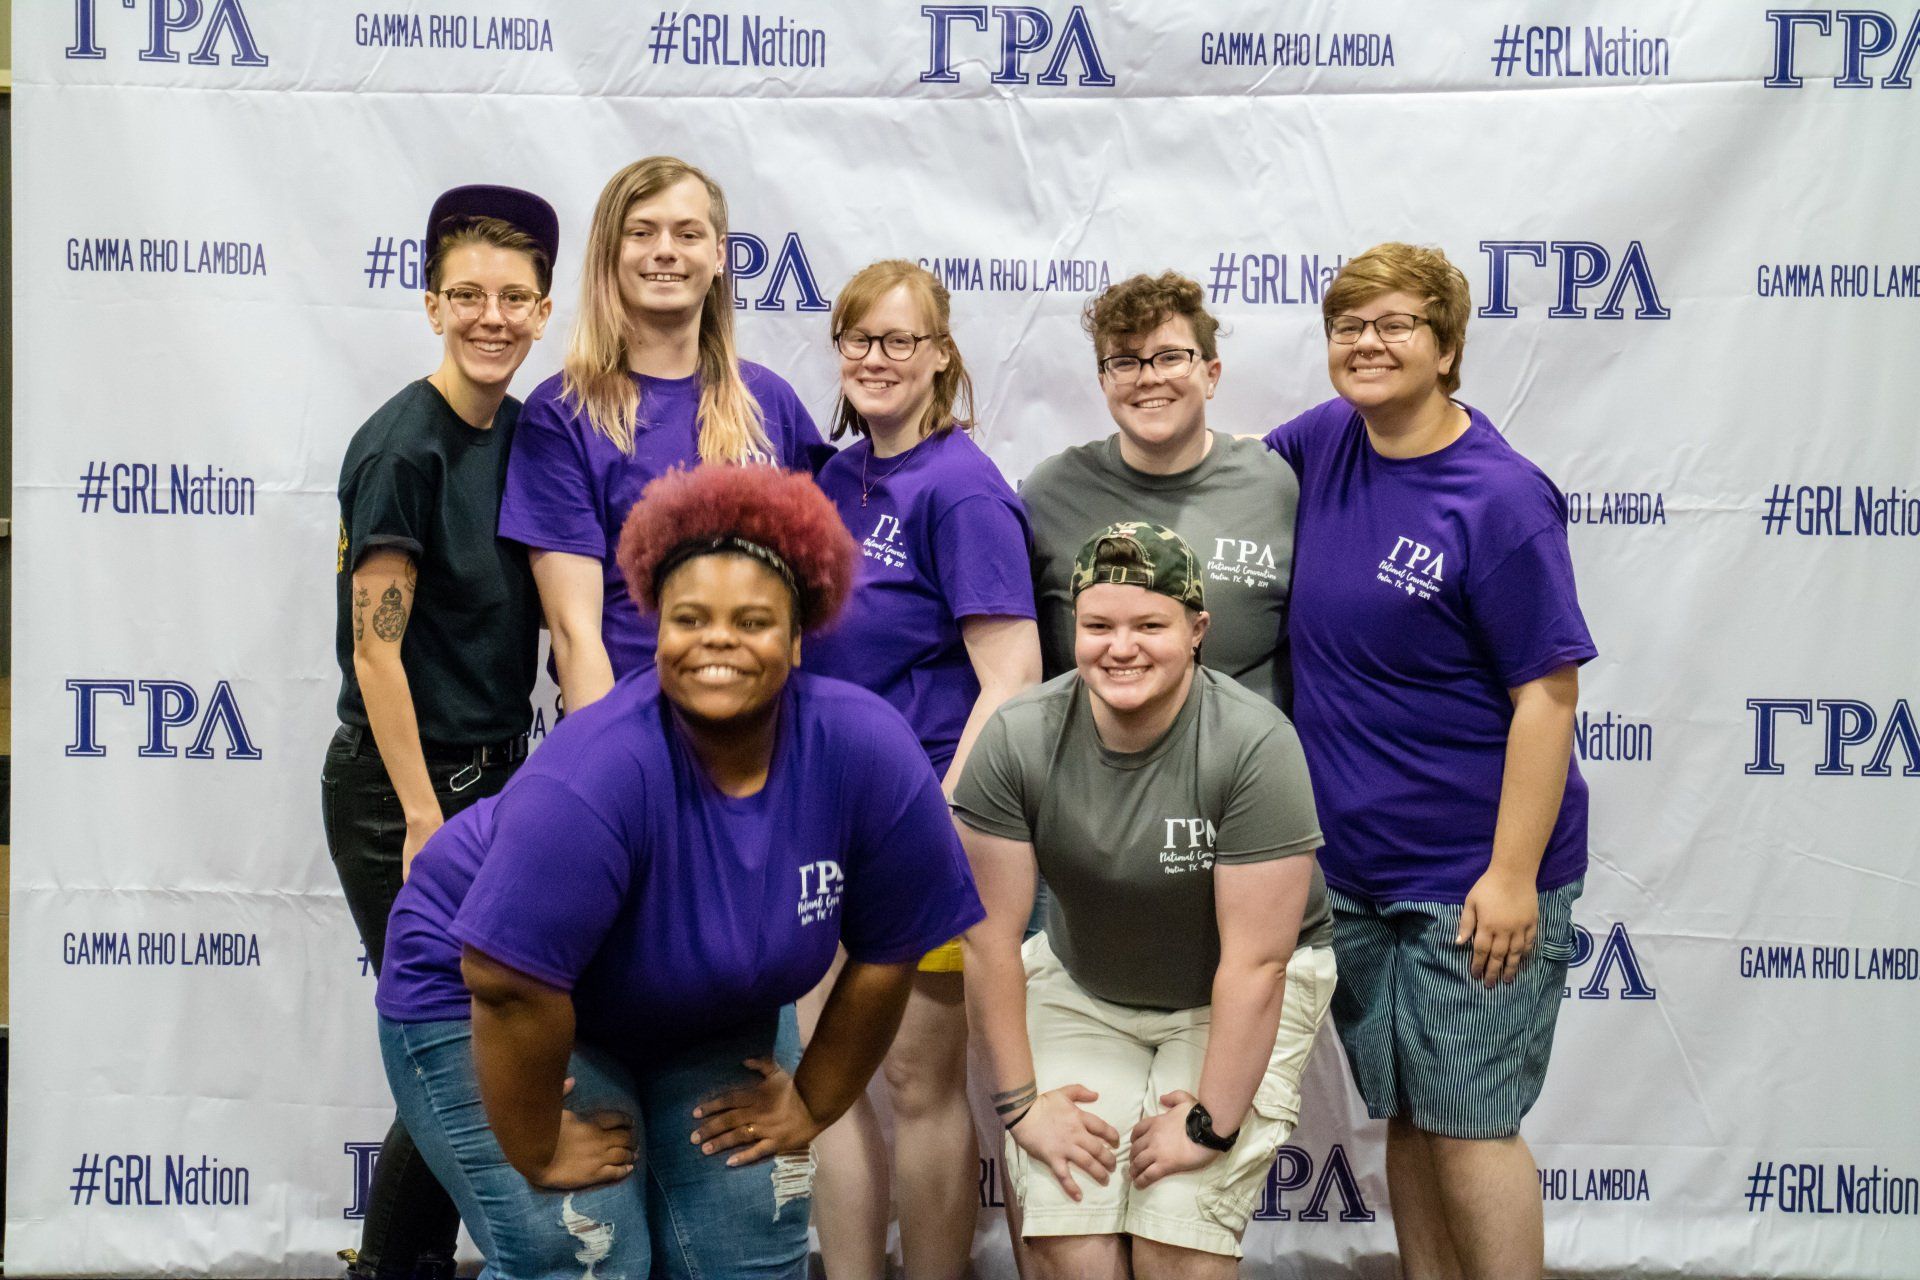 A group of people in purple, gray, and black shirts pose togther in front of a background with text on it.